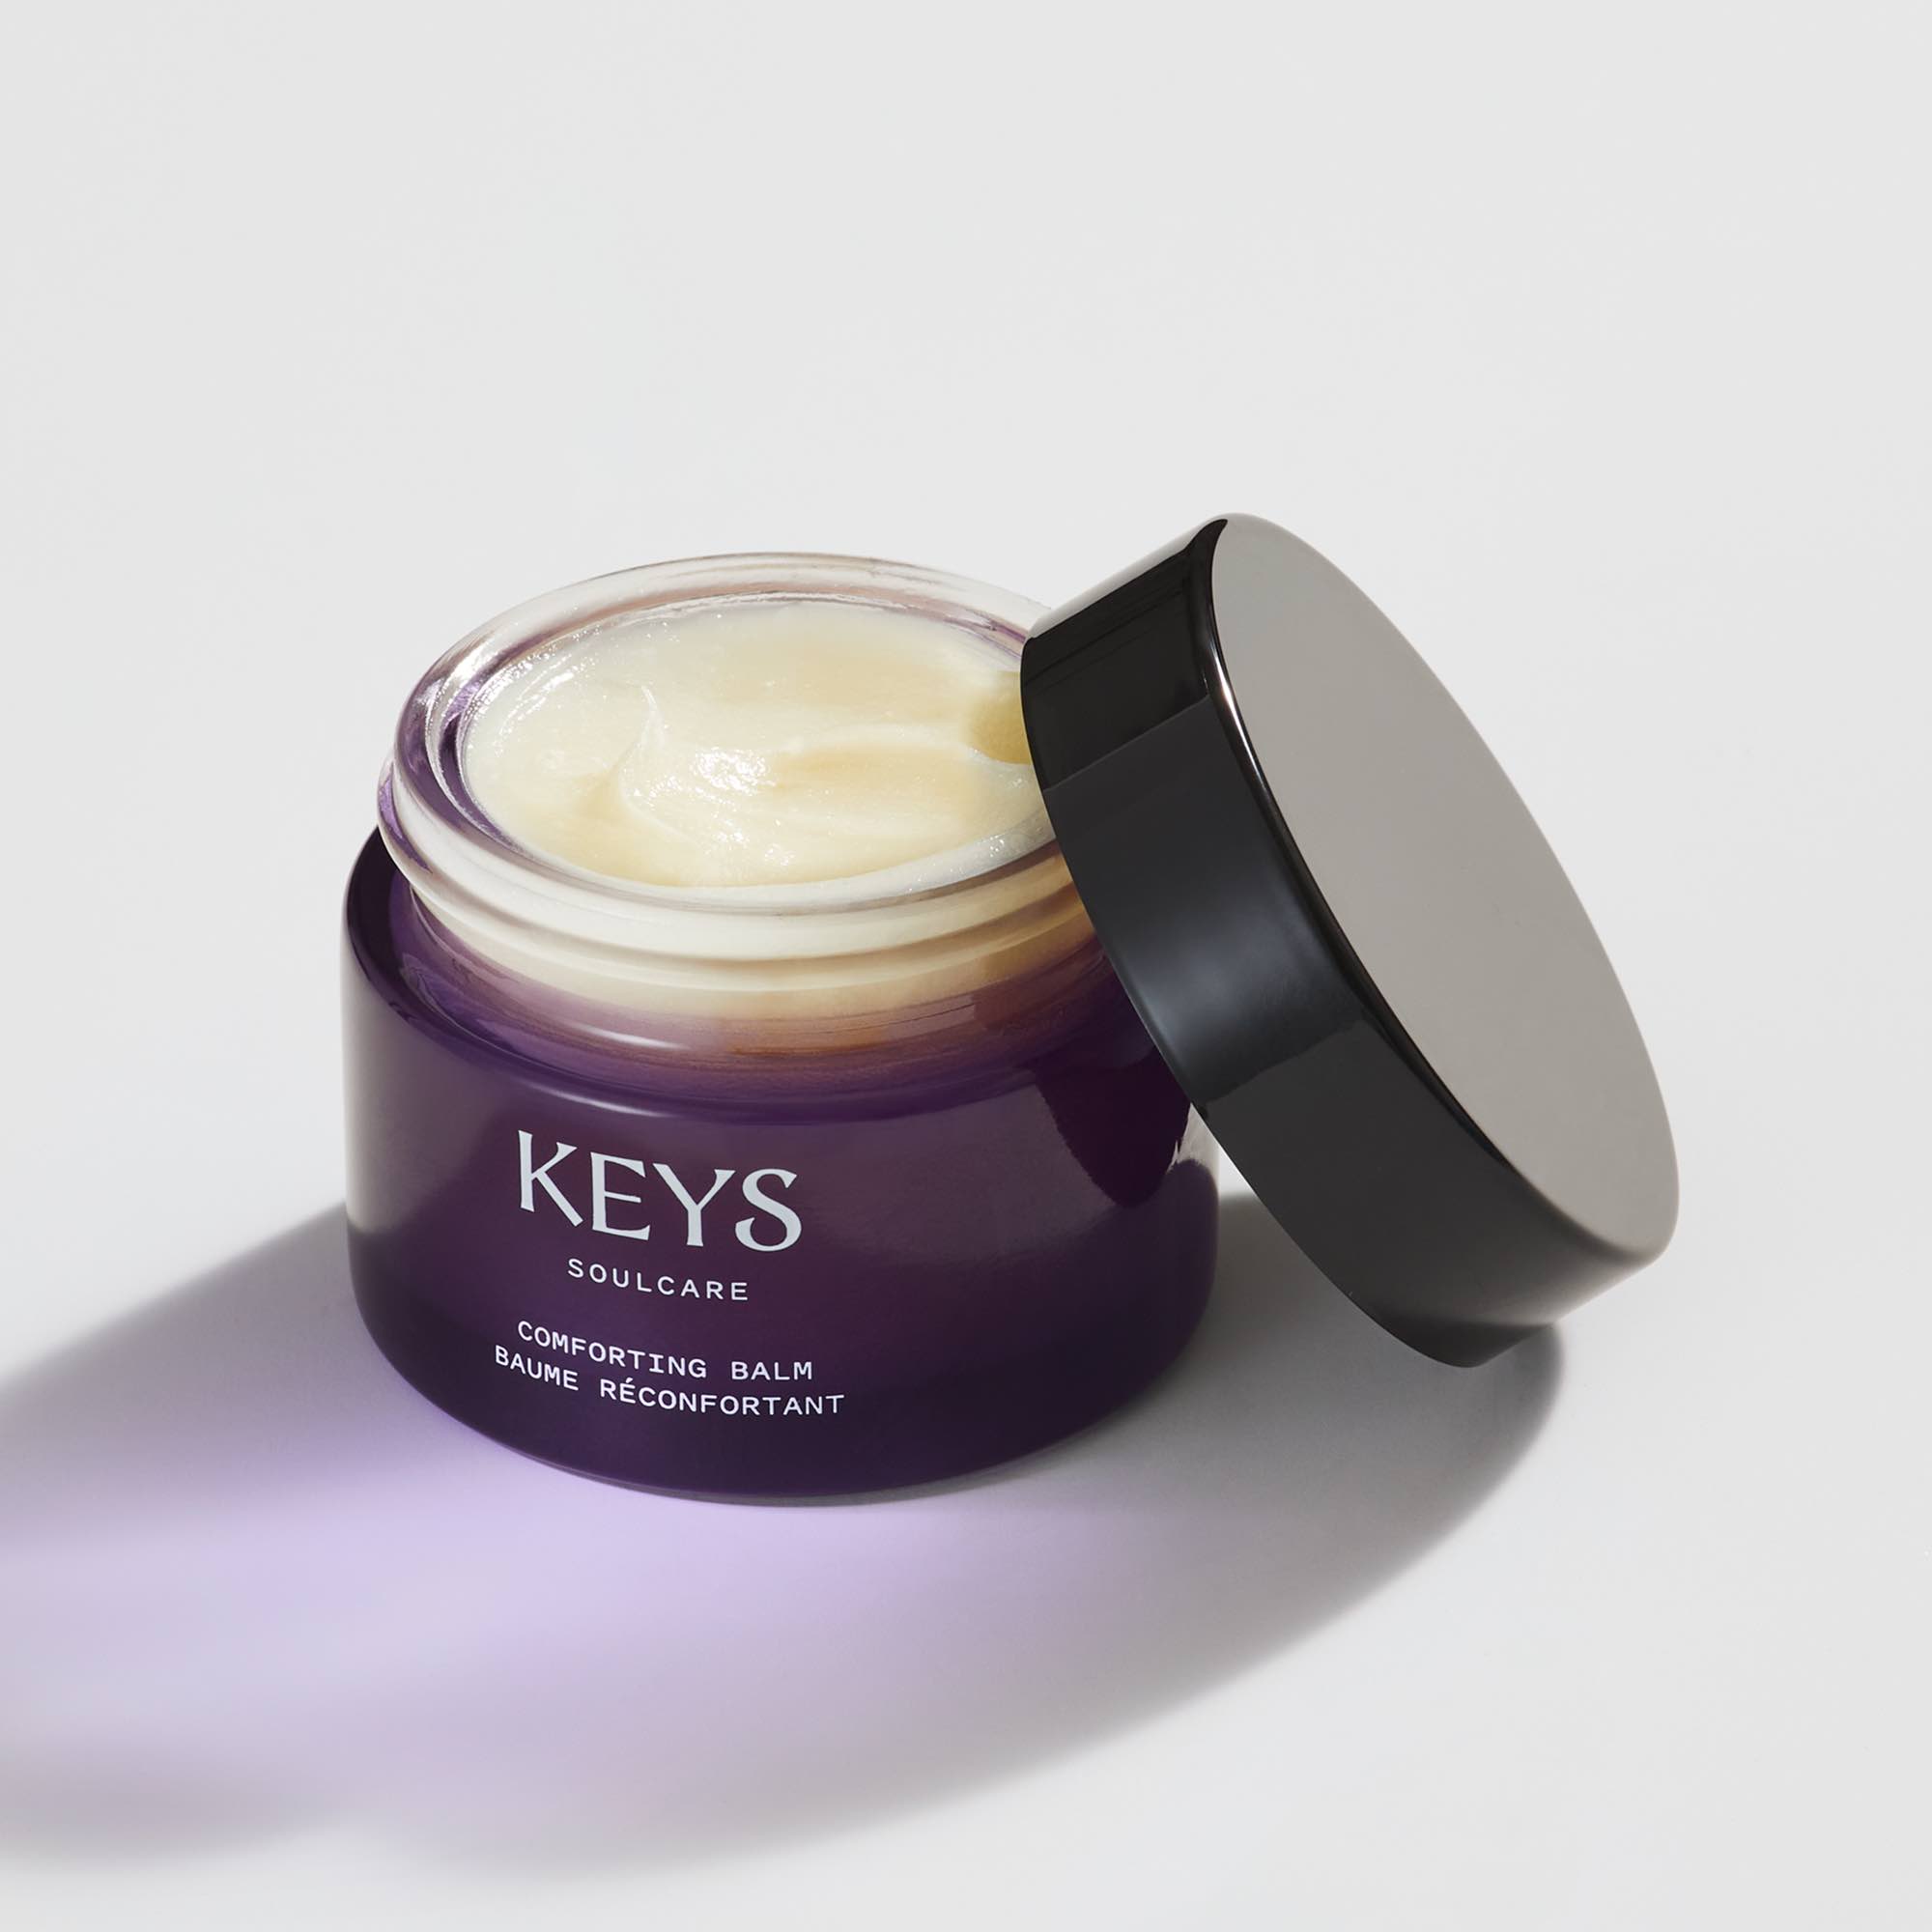 Keys Soulcare Comforting Balm - Large Size